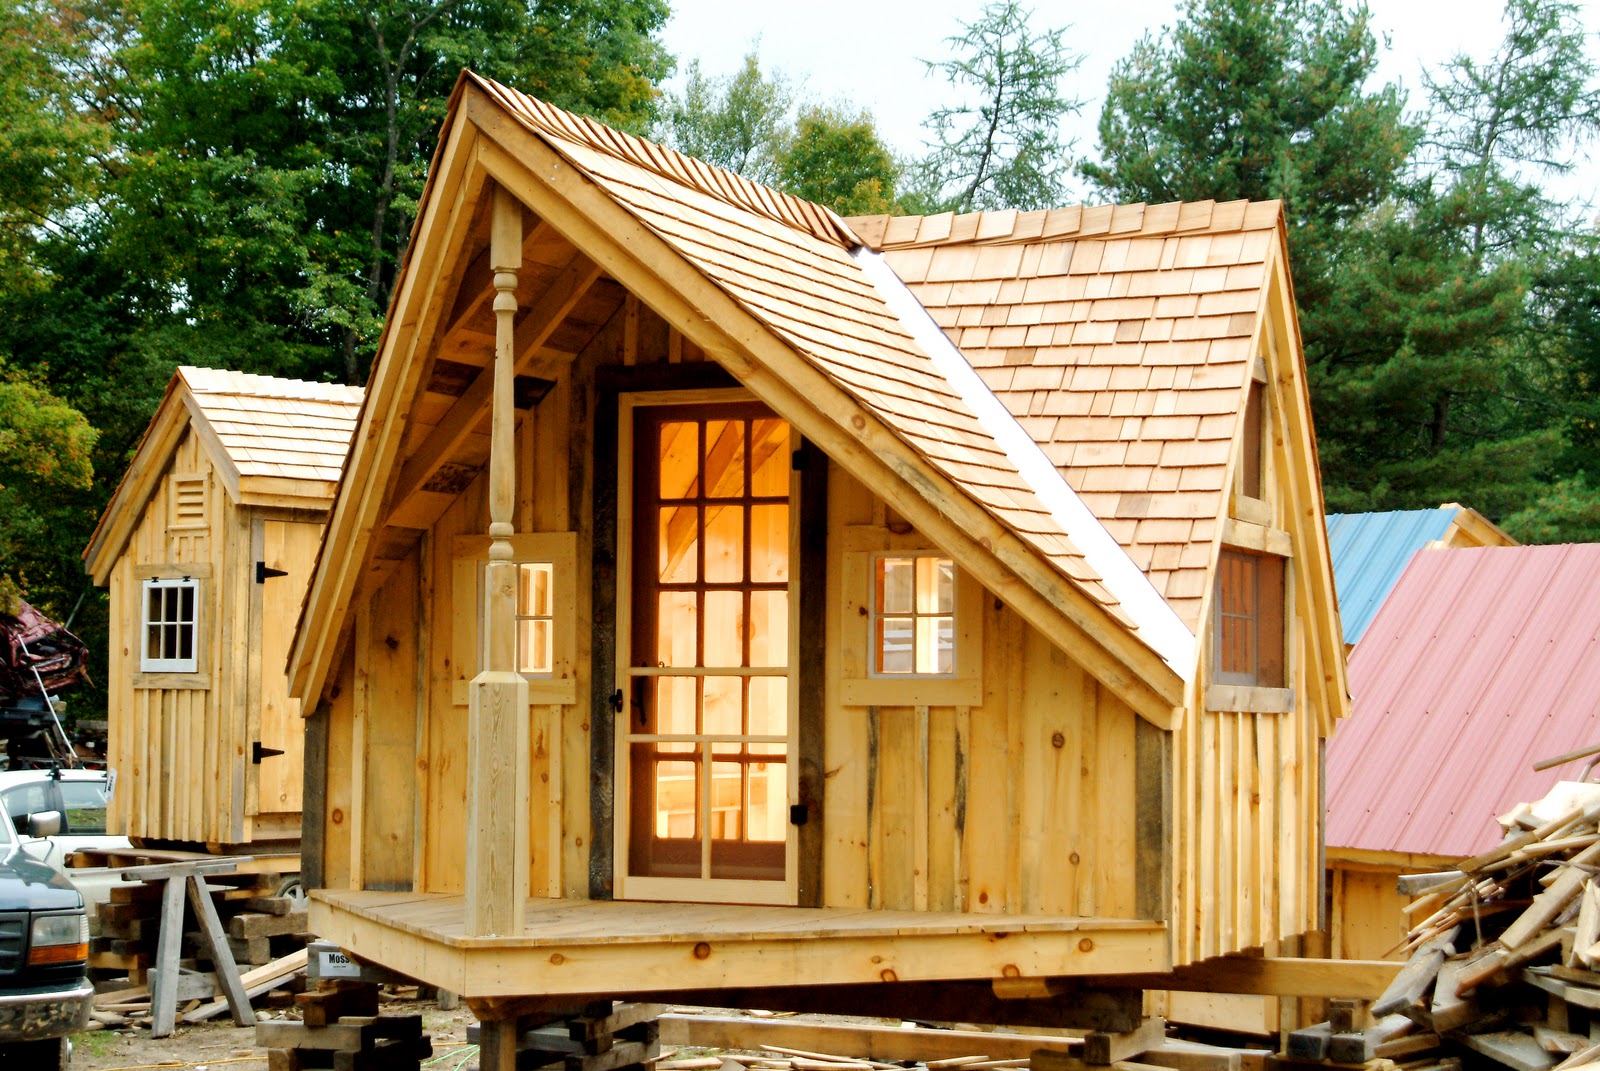 Relaxshacks.com: SIX FREE PLAN SETS for Tiny Houses/Cabins/Shedworking 